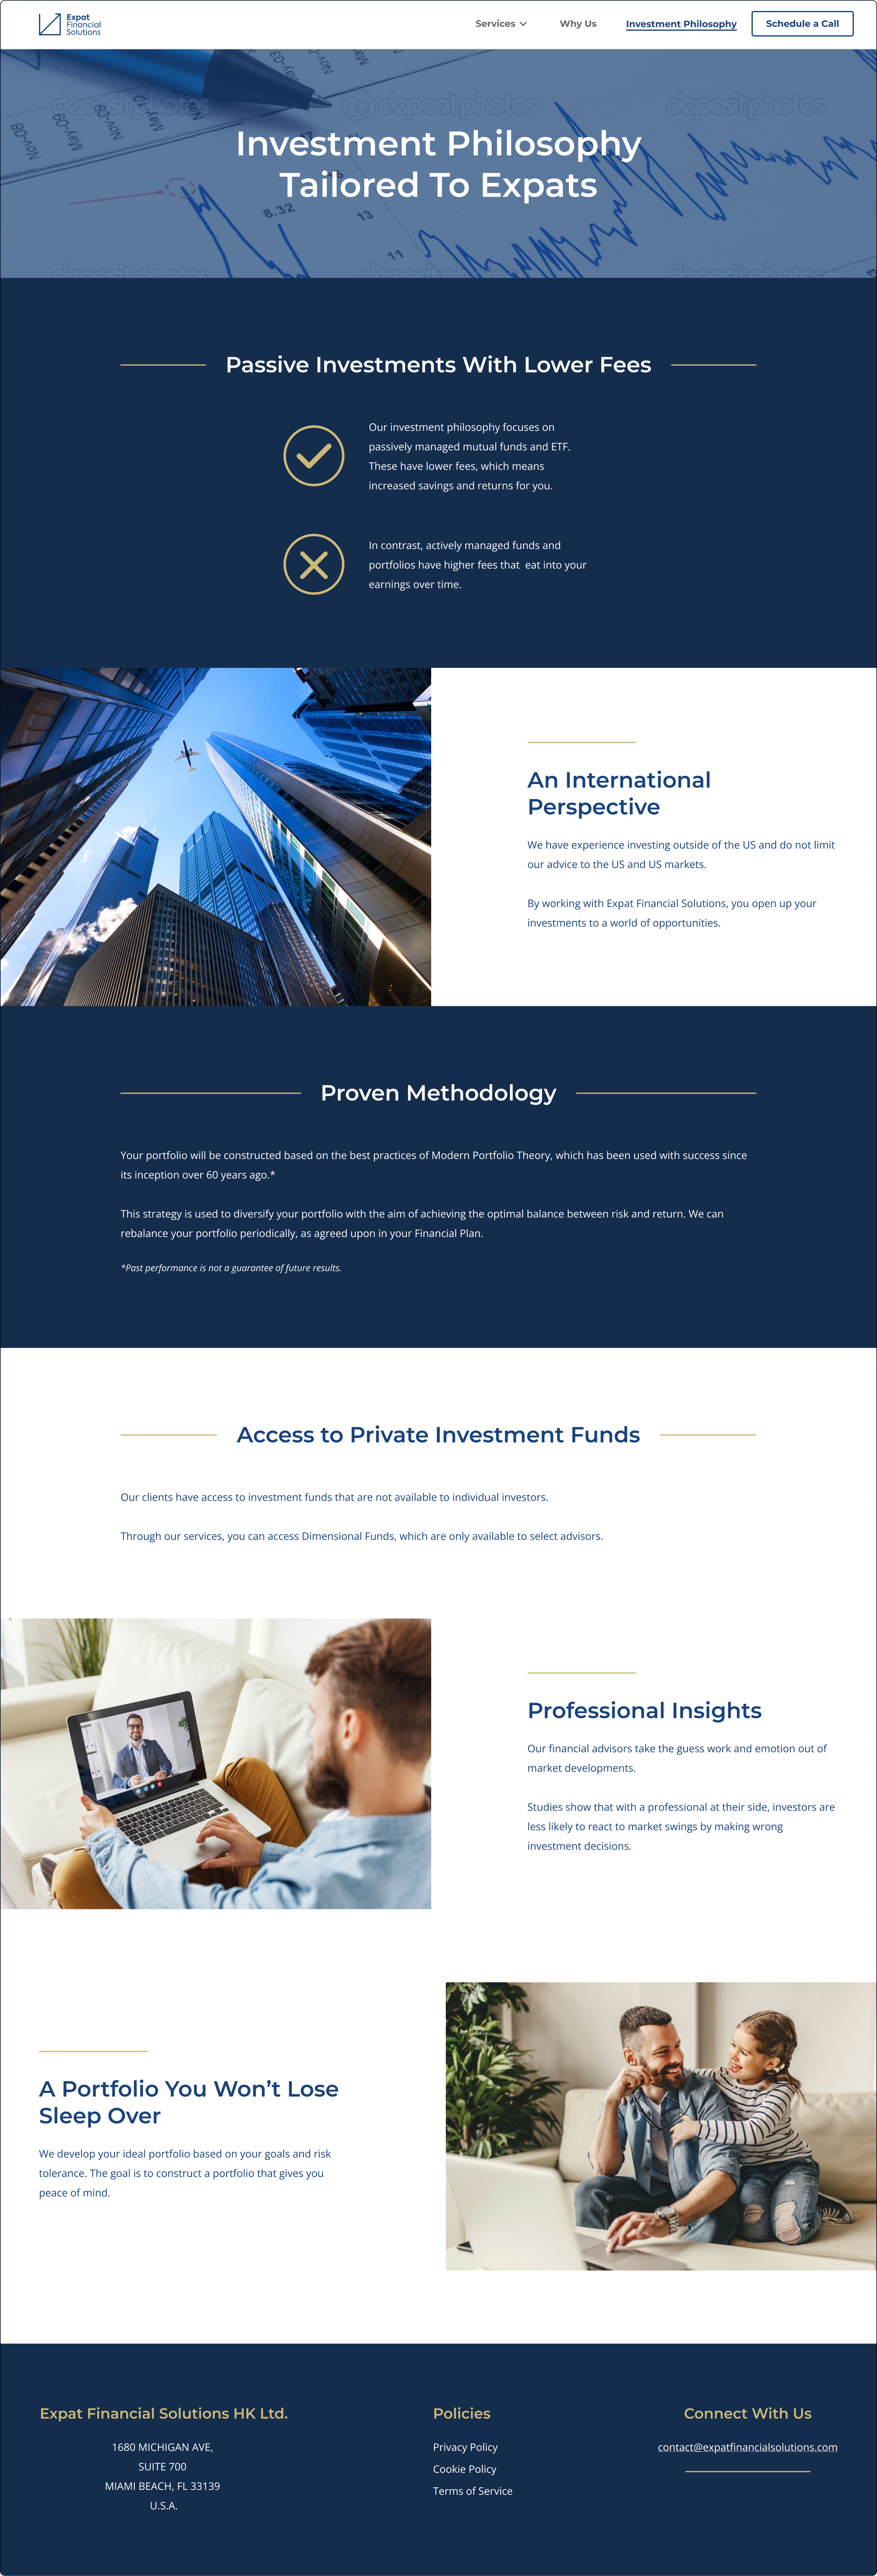 Investment philosophy page of Expat Financial Solutions